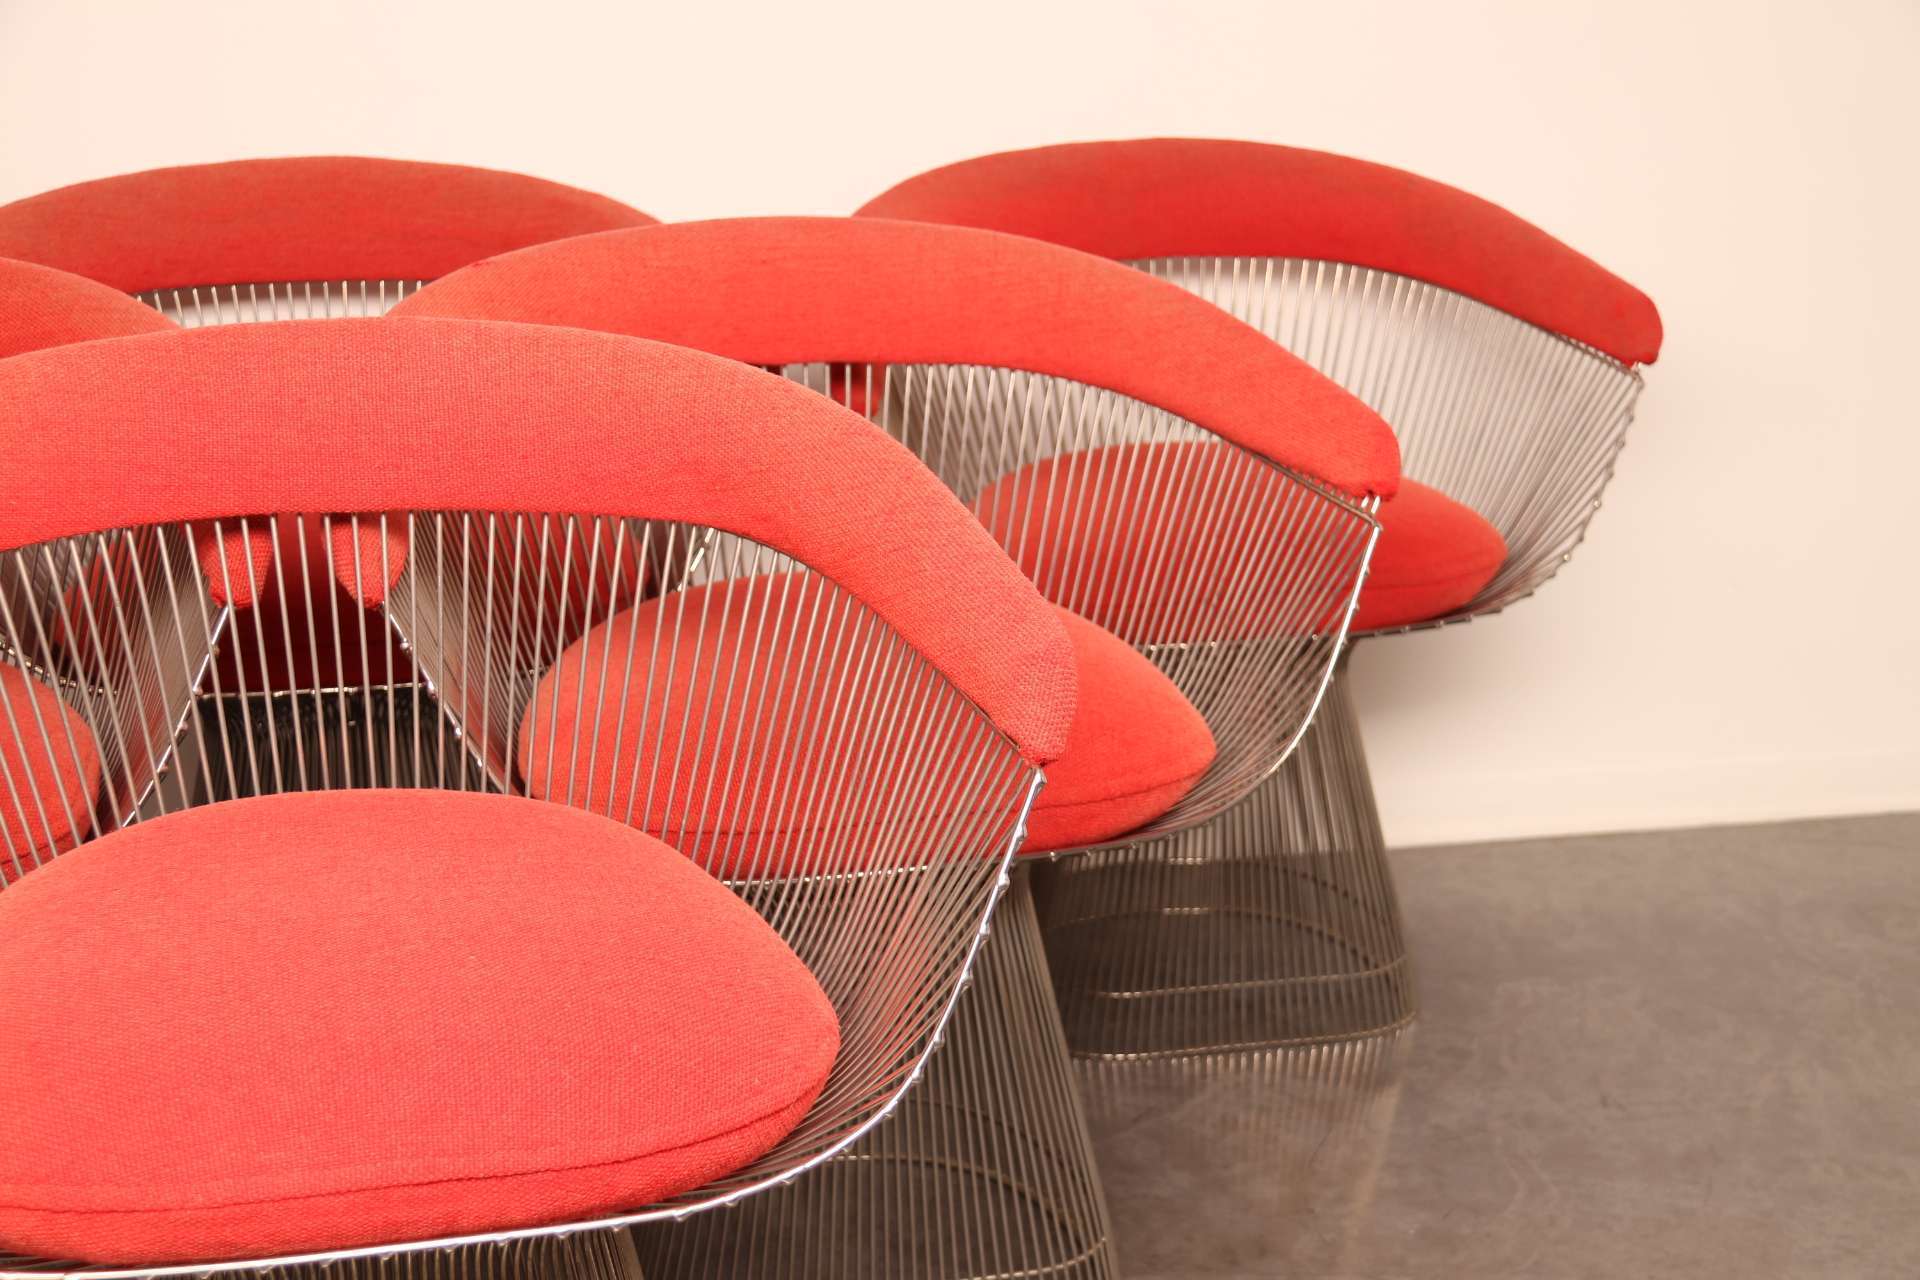 Wire Series Dining Table and Chairs by Warren Platner for Knoll International - A sculptural masterpiece of mid-century modern design